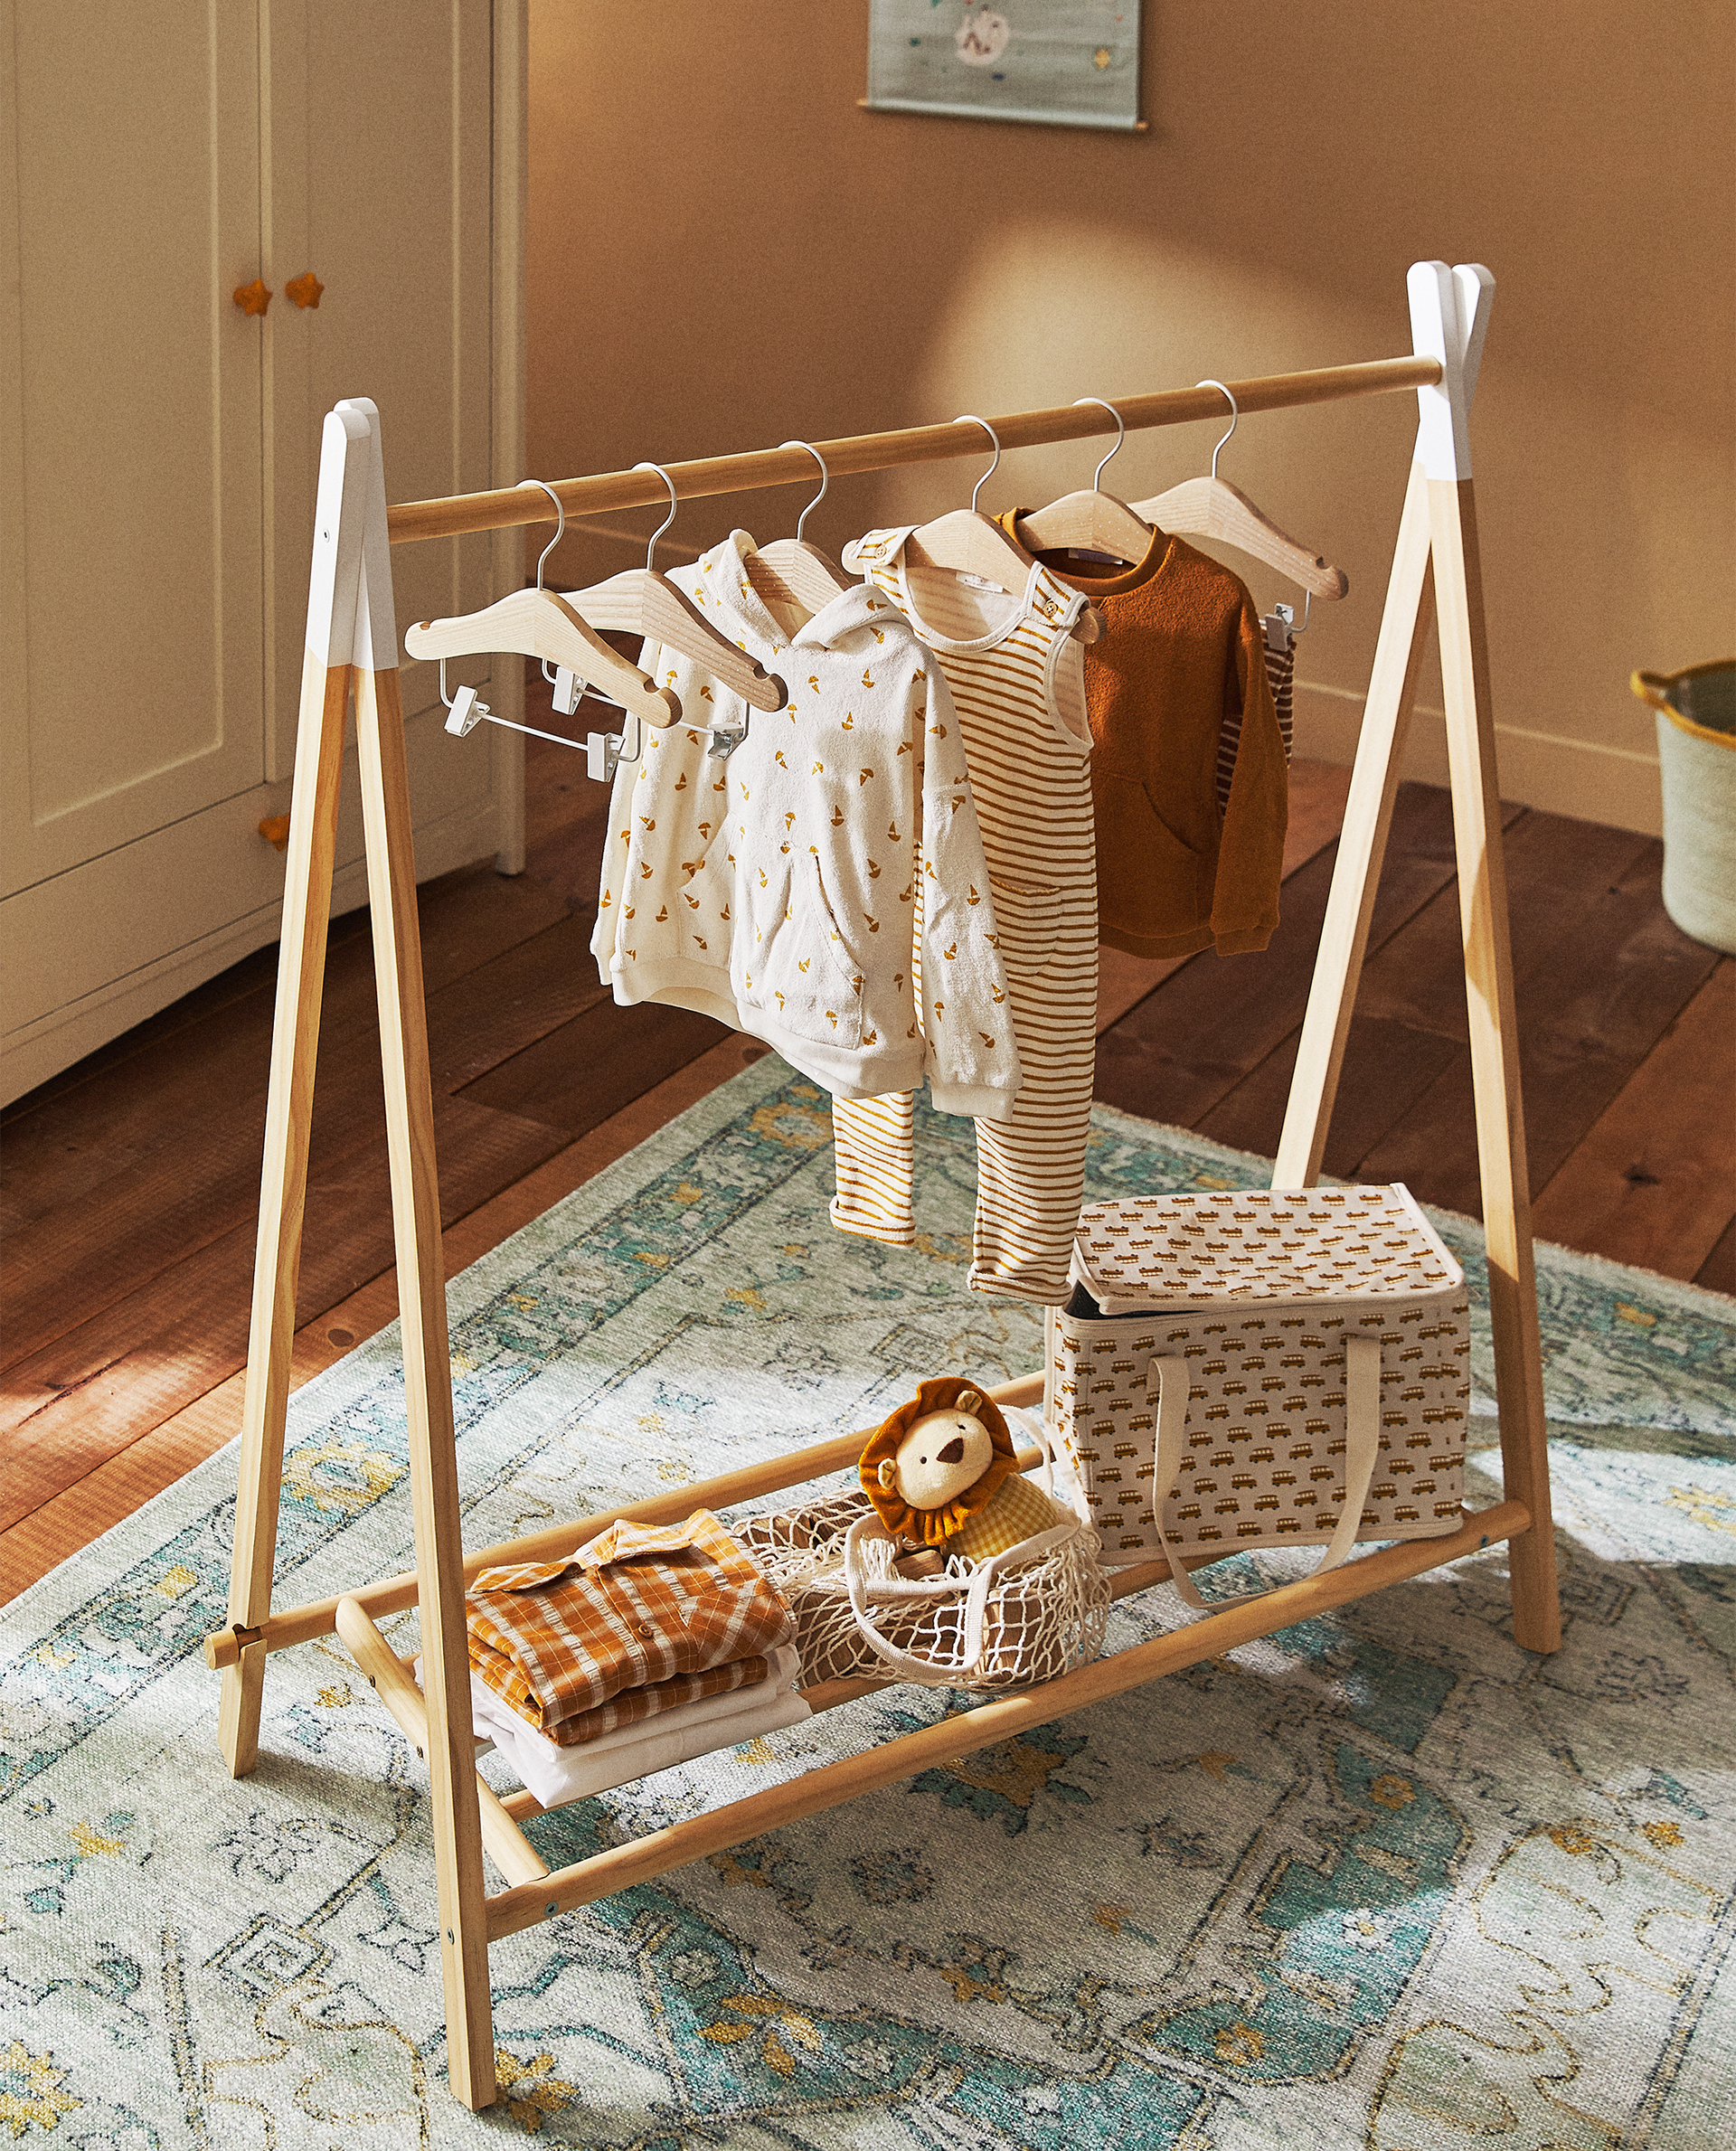 WOODEN CLOTHES RACK - Furniture 